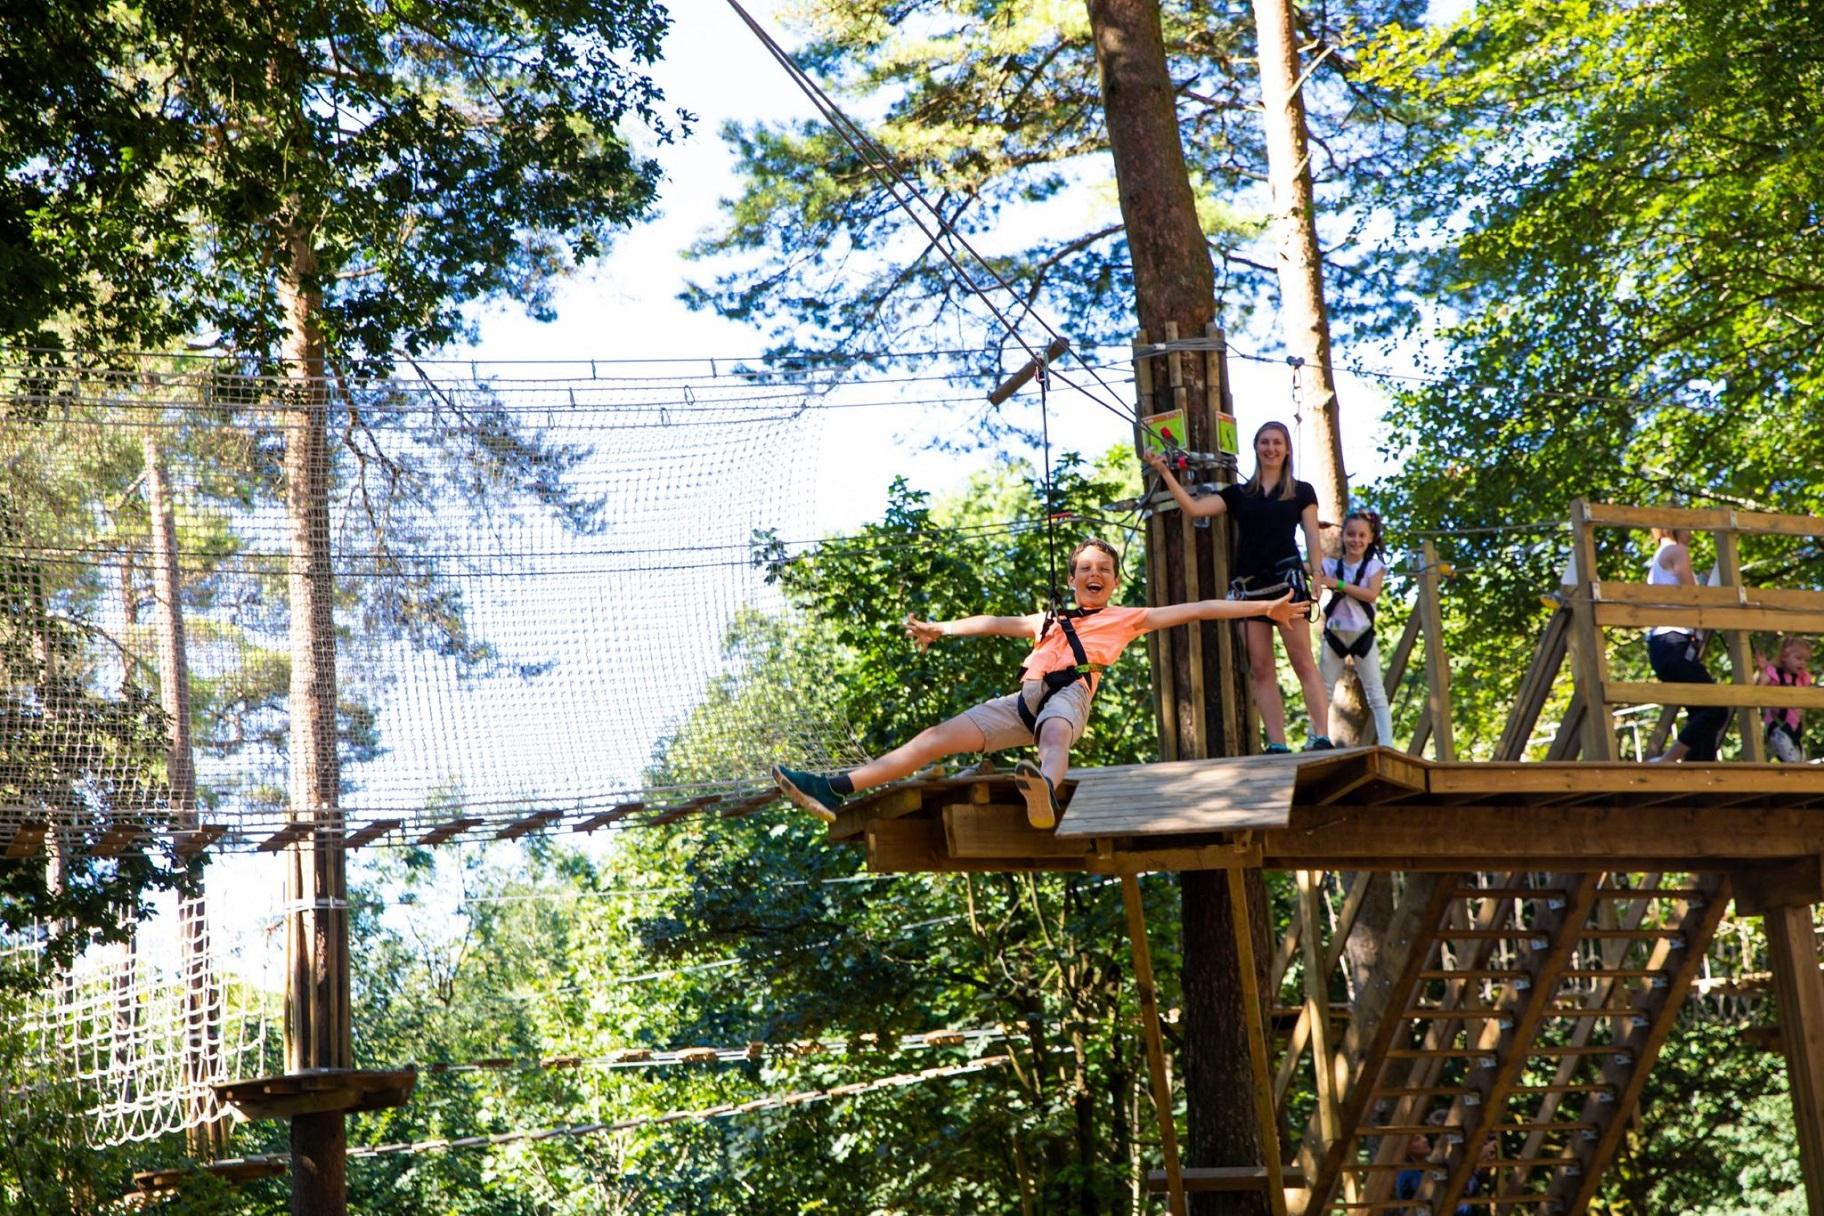 Outdoor adventure company Go Ape opened a zipline course at Bemis Woods in Western Springs in 2016. (Courtesy Go Ape)